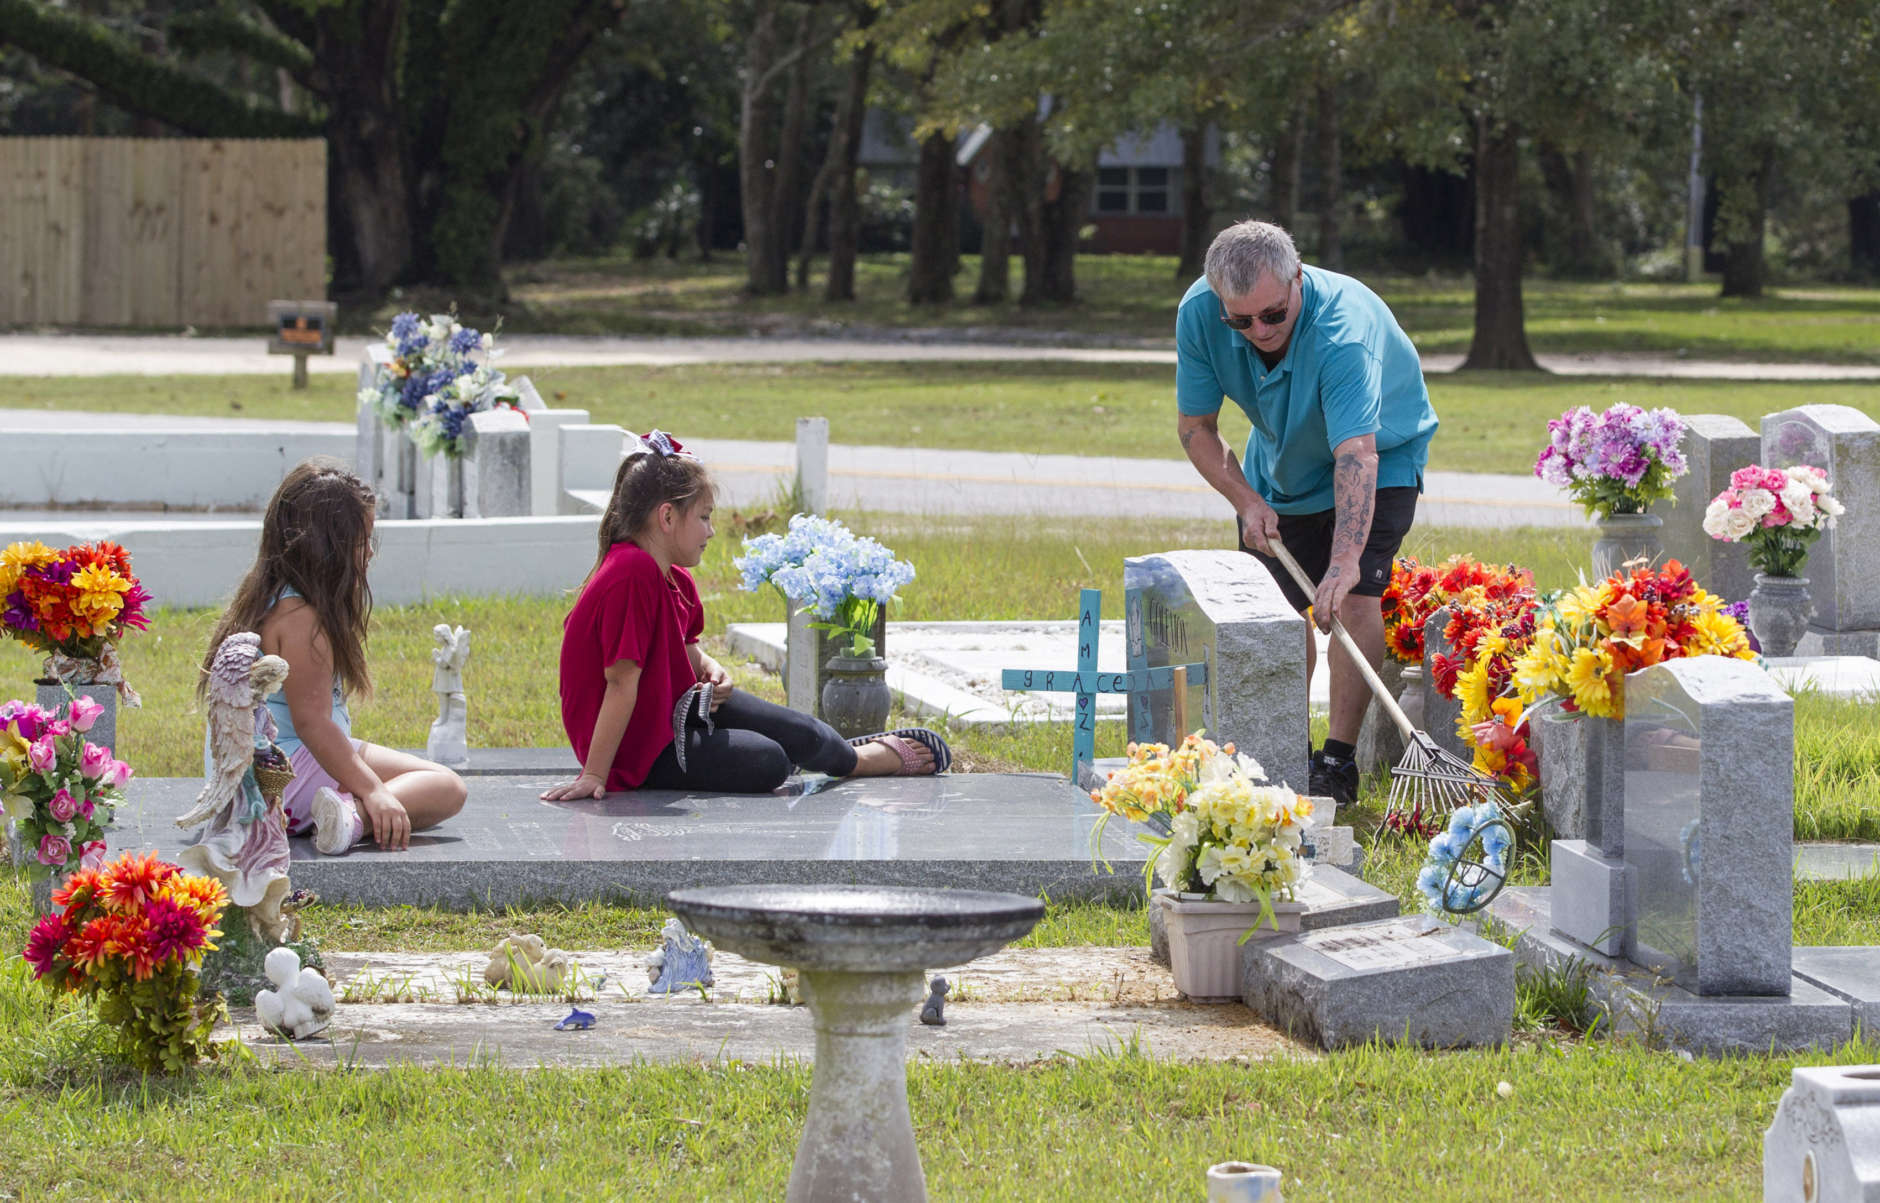 BAYOU LA BATRE, AL - OCTOBER 8:  Tracy Goleman (R) rakes up the debris and litter from Hurricane Nate from the Goleman family plot with his nieces (L-R) Natalina Nicolas, 8, and Briana Nicolas, 10 at the Oddfellows Cemetery on October 8, 2017 in Bayou La Batre, Alabama. Hurricane Nate made its second landfall along the north Mississippi Gulf Coast as a category 1 hurricane Sunday before weakening to a tropical storm.  (Photo by Mark Wallheiser/Getty Images)